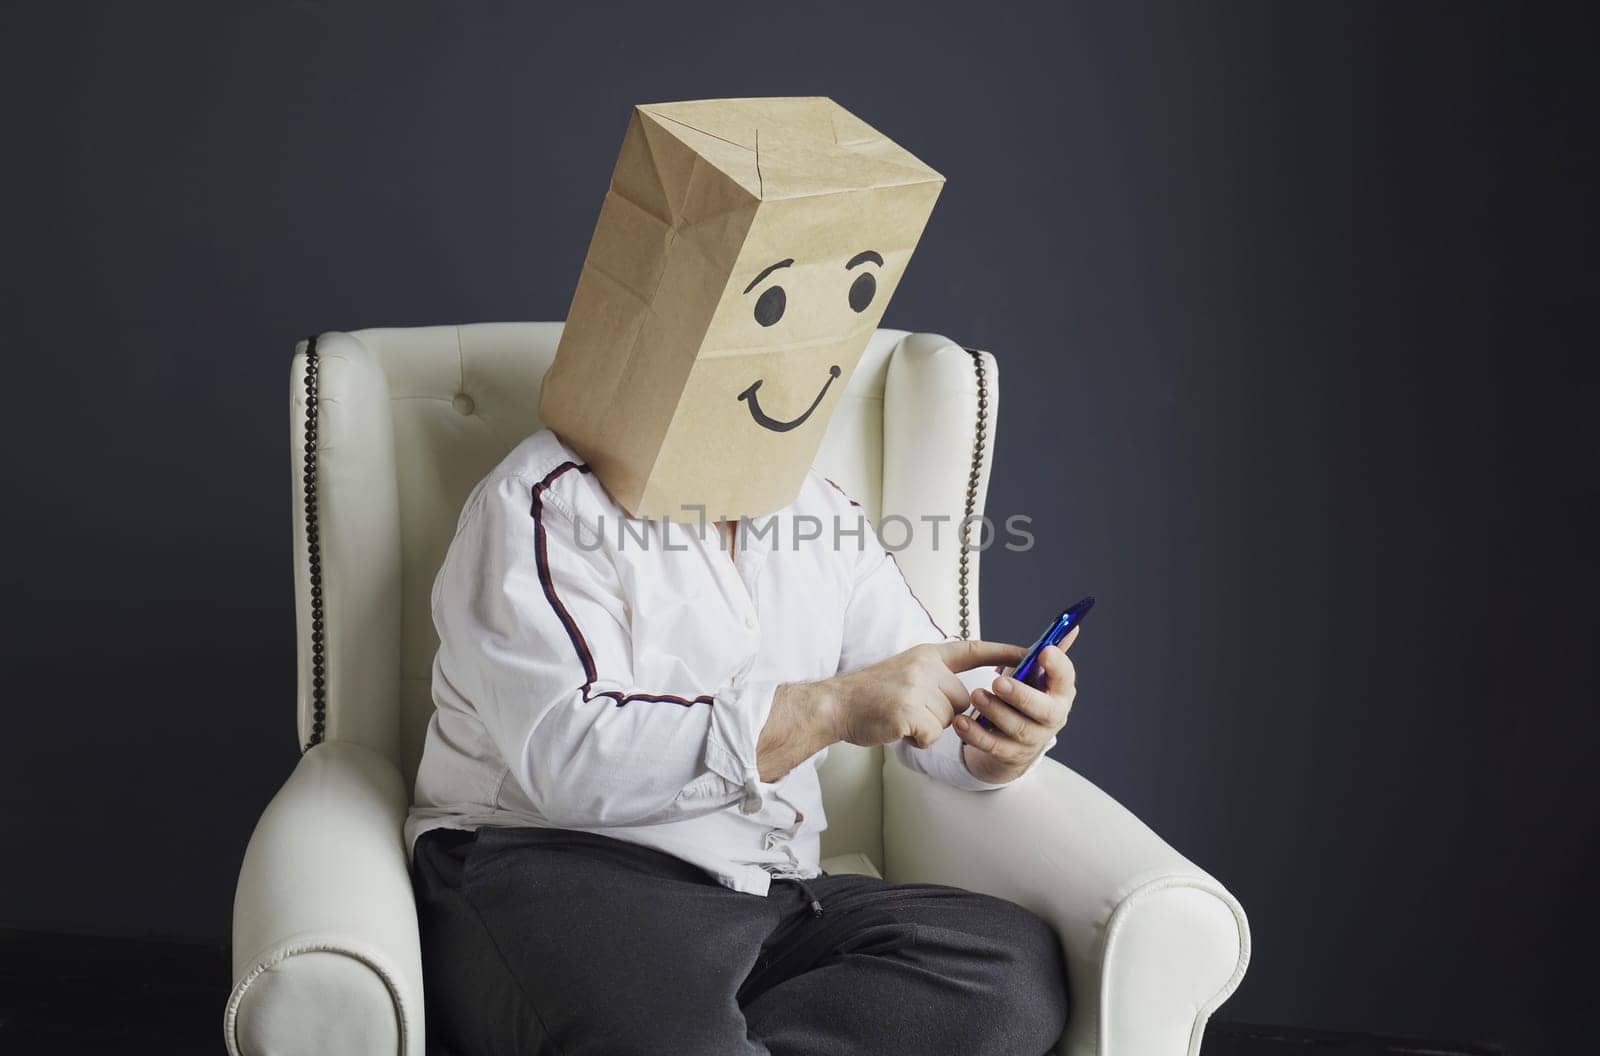 A man in a white shirt with a paper bag on his head, with a smiley face drawn, is typing a message on a smartphone by Sd28DimoN_1976